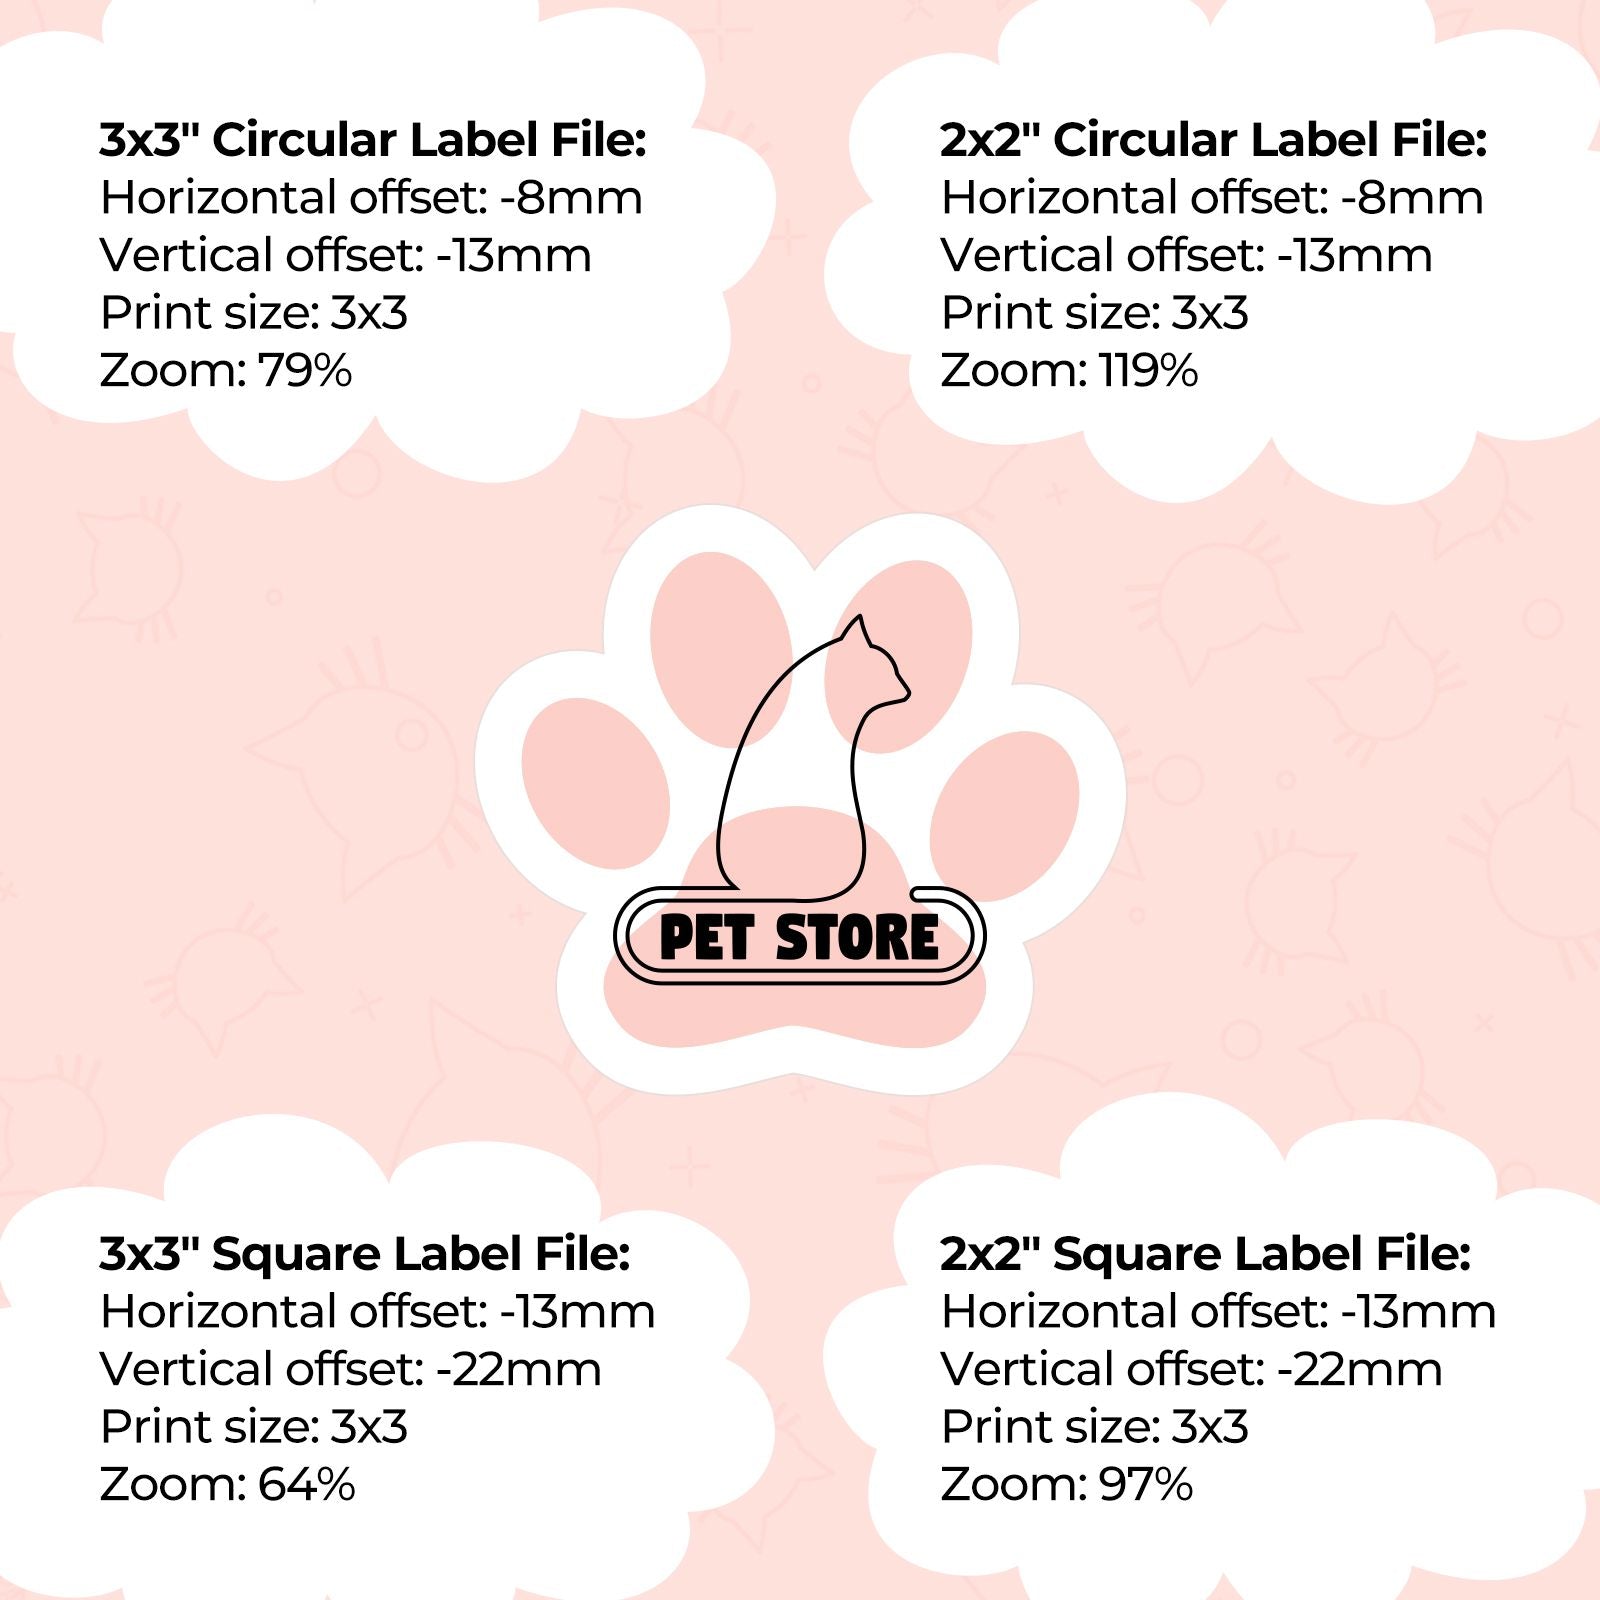 Available in various sizes, these labels are versatile and perfect for a range of labeling tasks, including product labeling, gift tags, and price tags.